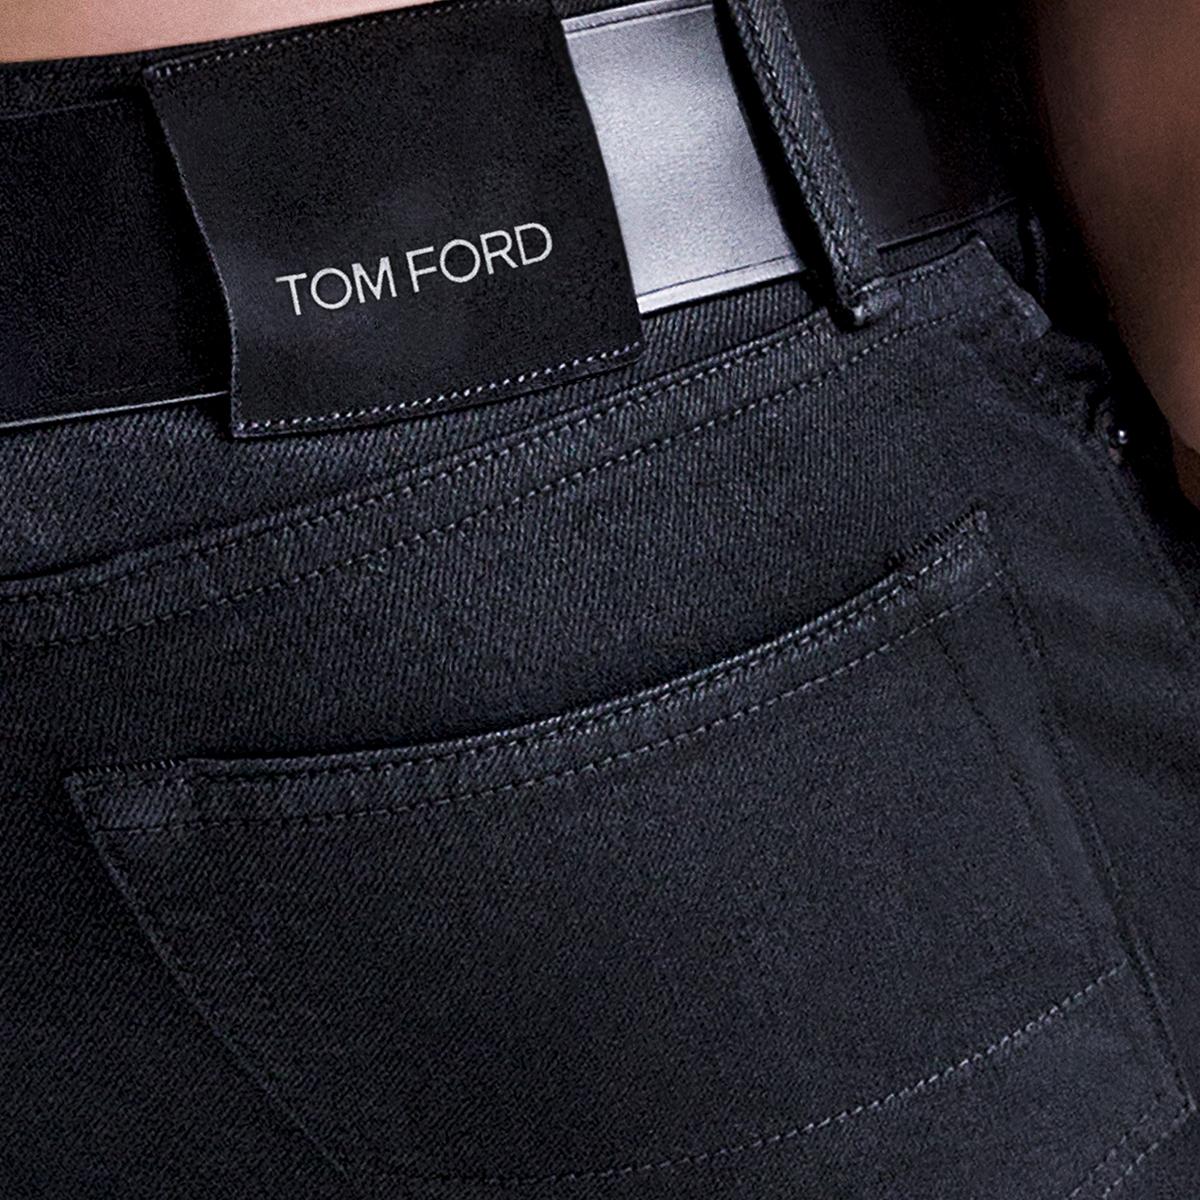 TOM on "Hand-stitched labels debossed the signature TOM FORD logo. #TFJeans http://t.co/uRbRa7hRuV http://t.co/CdLSpkjHYD" / Twitter